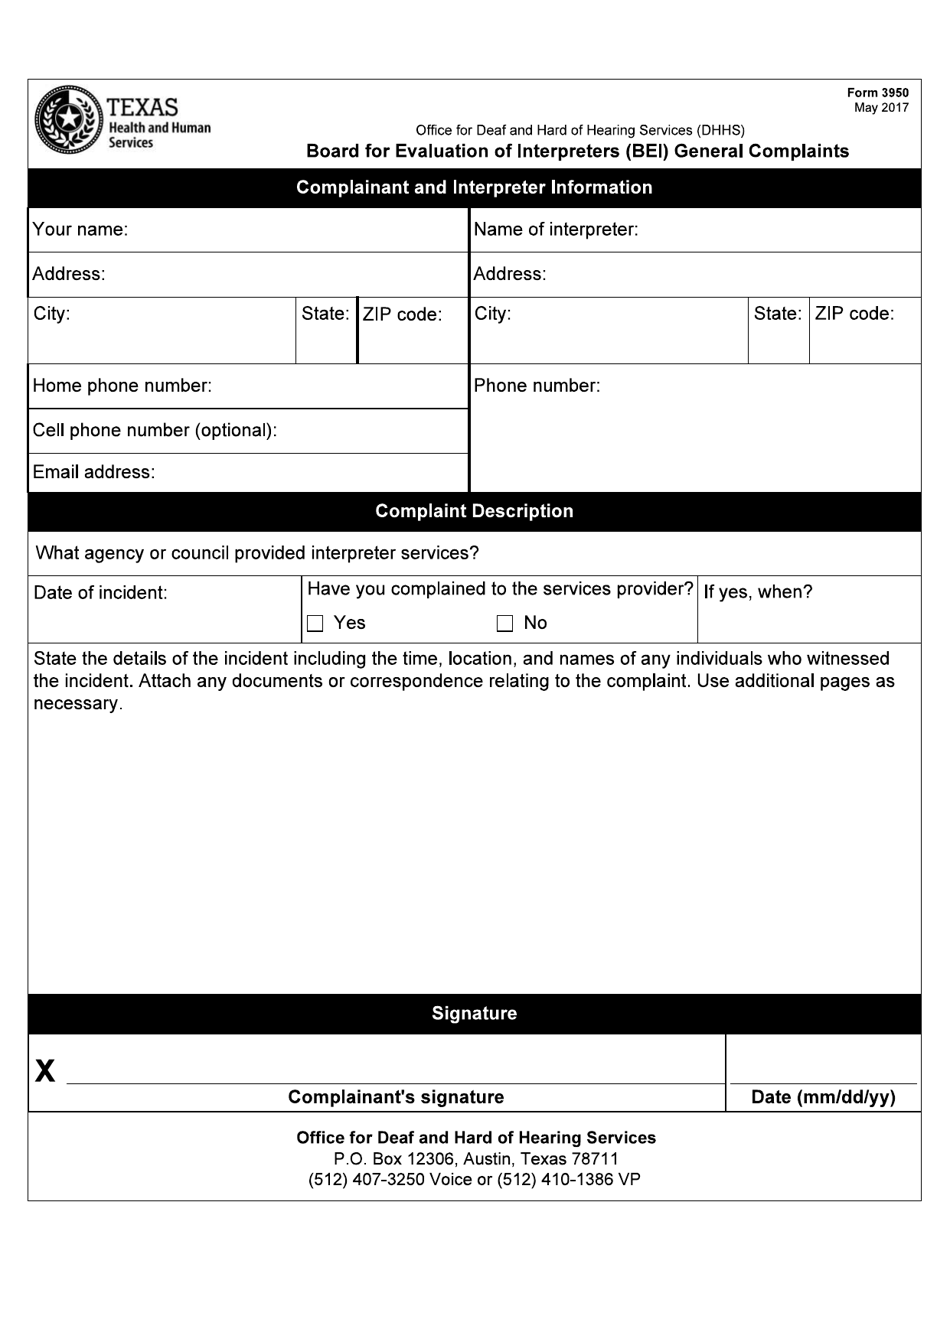 Form 3950 Board for Evaluation of Interpreters (Bei) General Complaints - Texas, Page 1